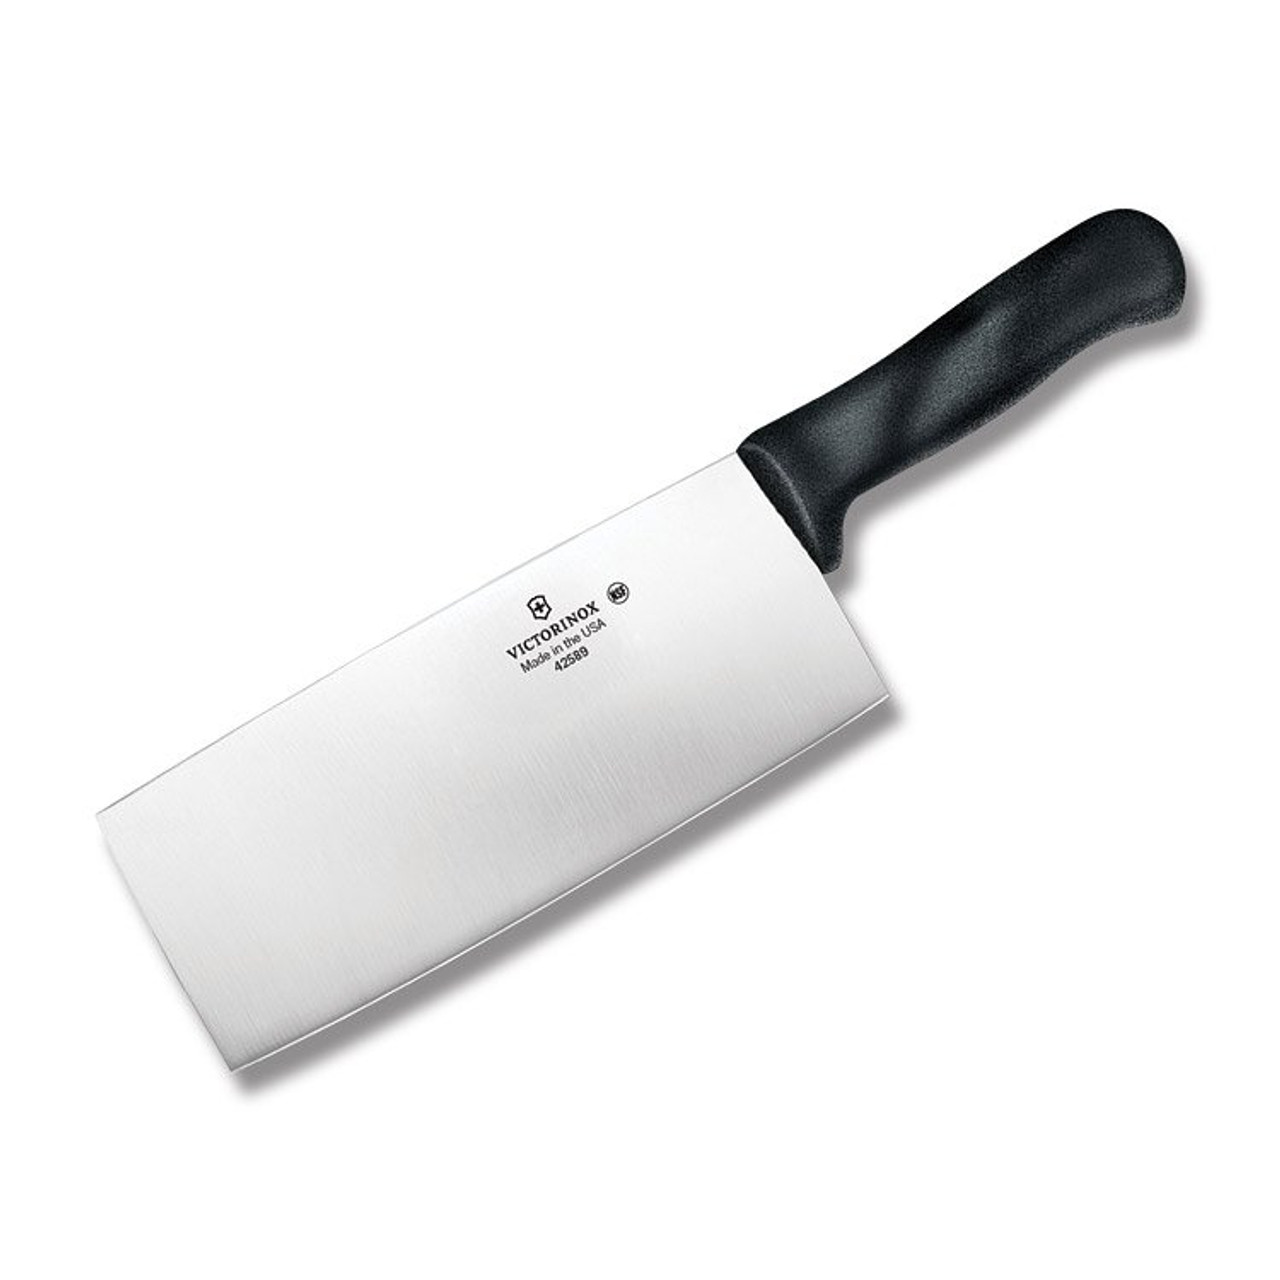 Victorinox 8 Chinese Cleaver with Black Polypropylene Handle